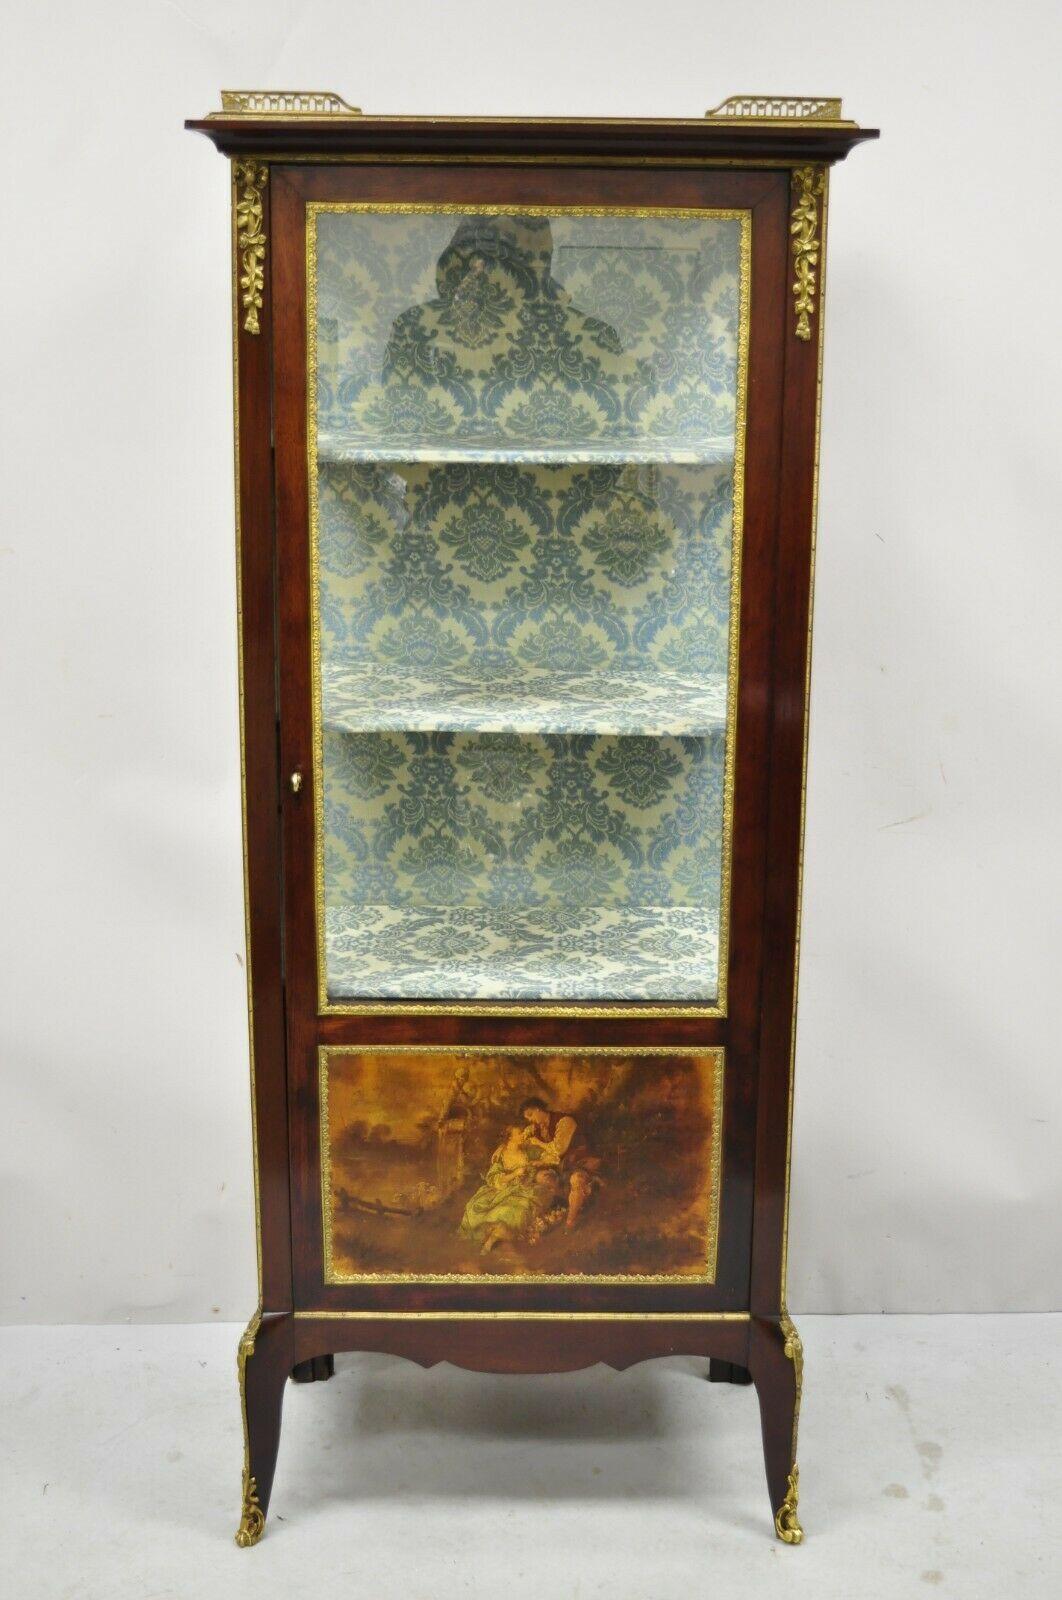 Antique French Louis XV style bronze mount hand painted curio display cabinet. Item features a hand painted door front, finely cast bronze ormolu, fabric upholstered blue interior,1 glass swing door, working lock and key, 3 shelves, very nice